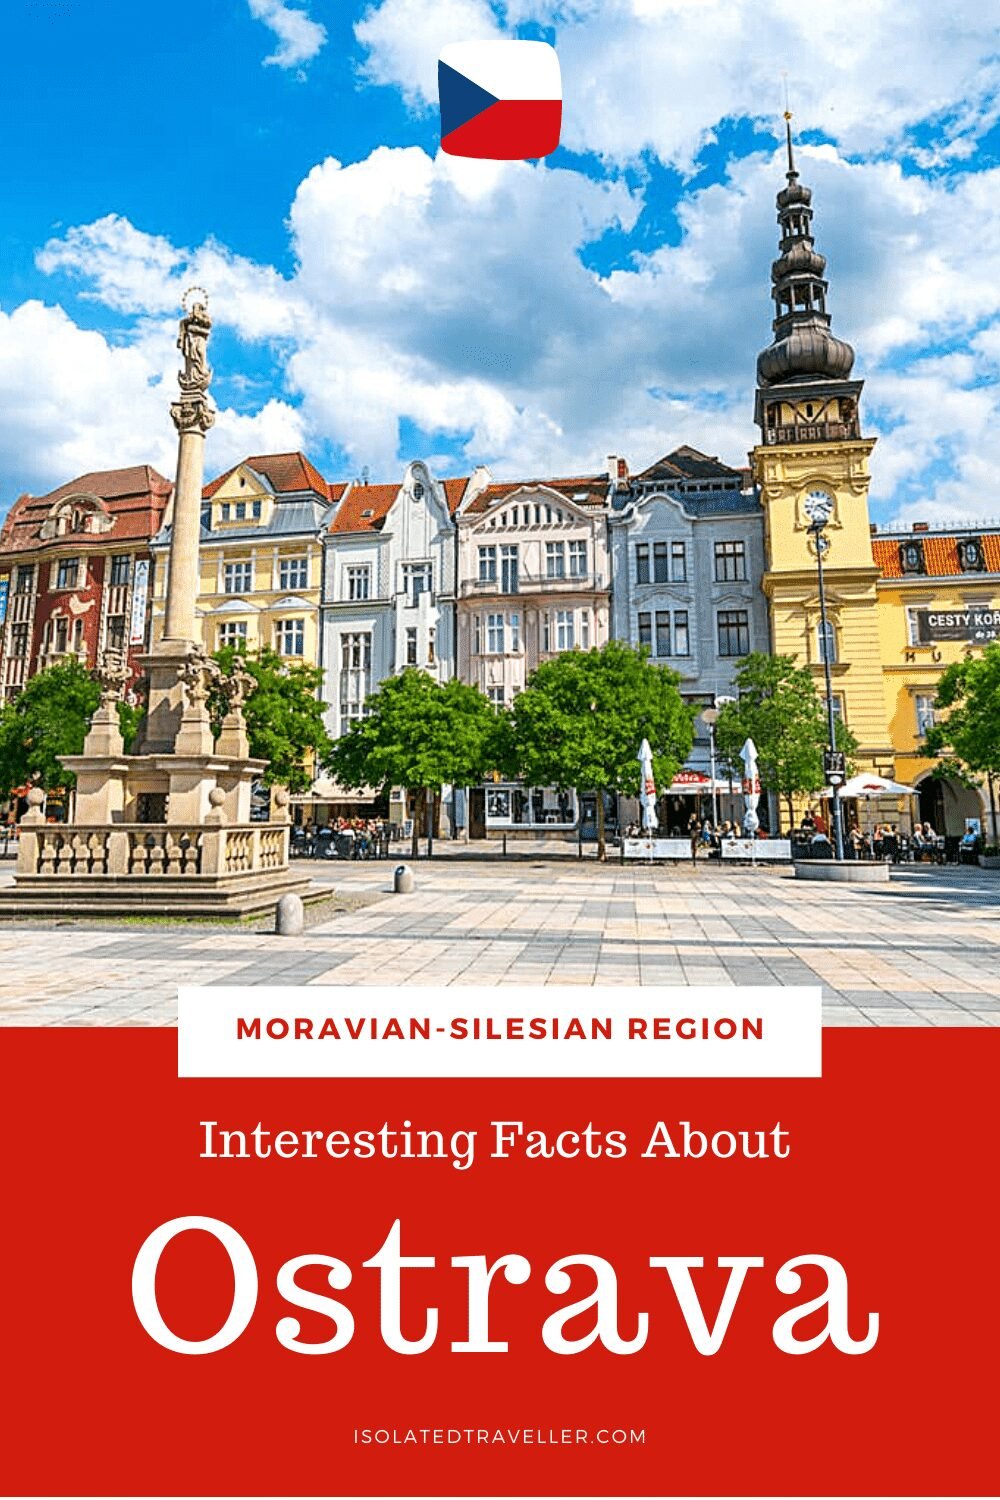 Facts About Ostrava